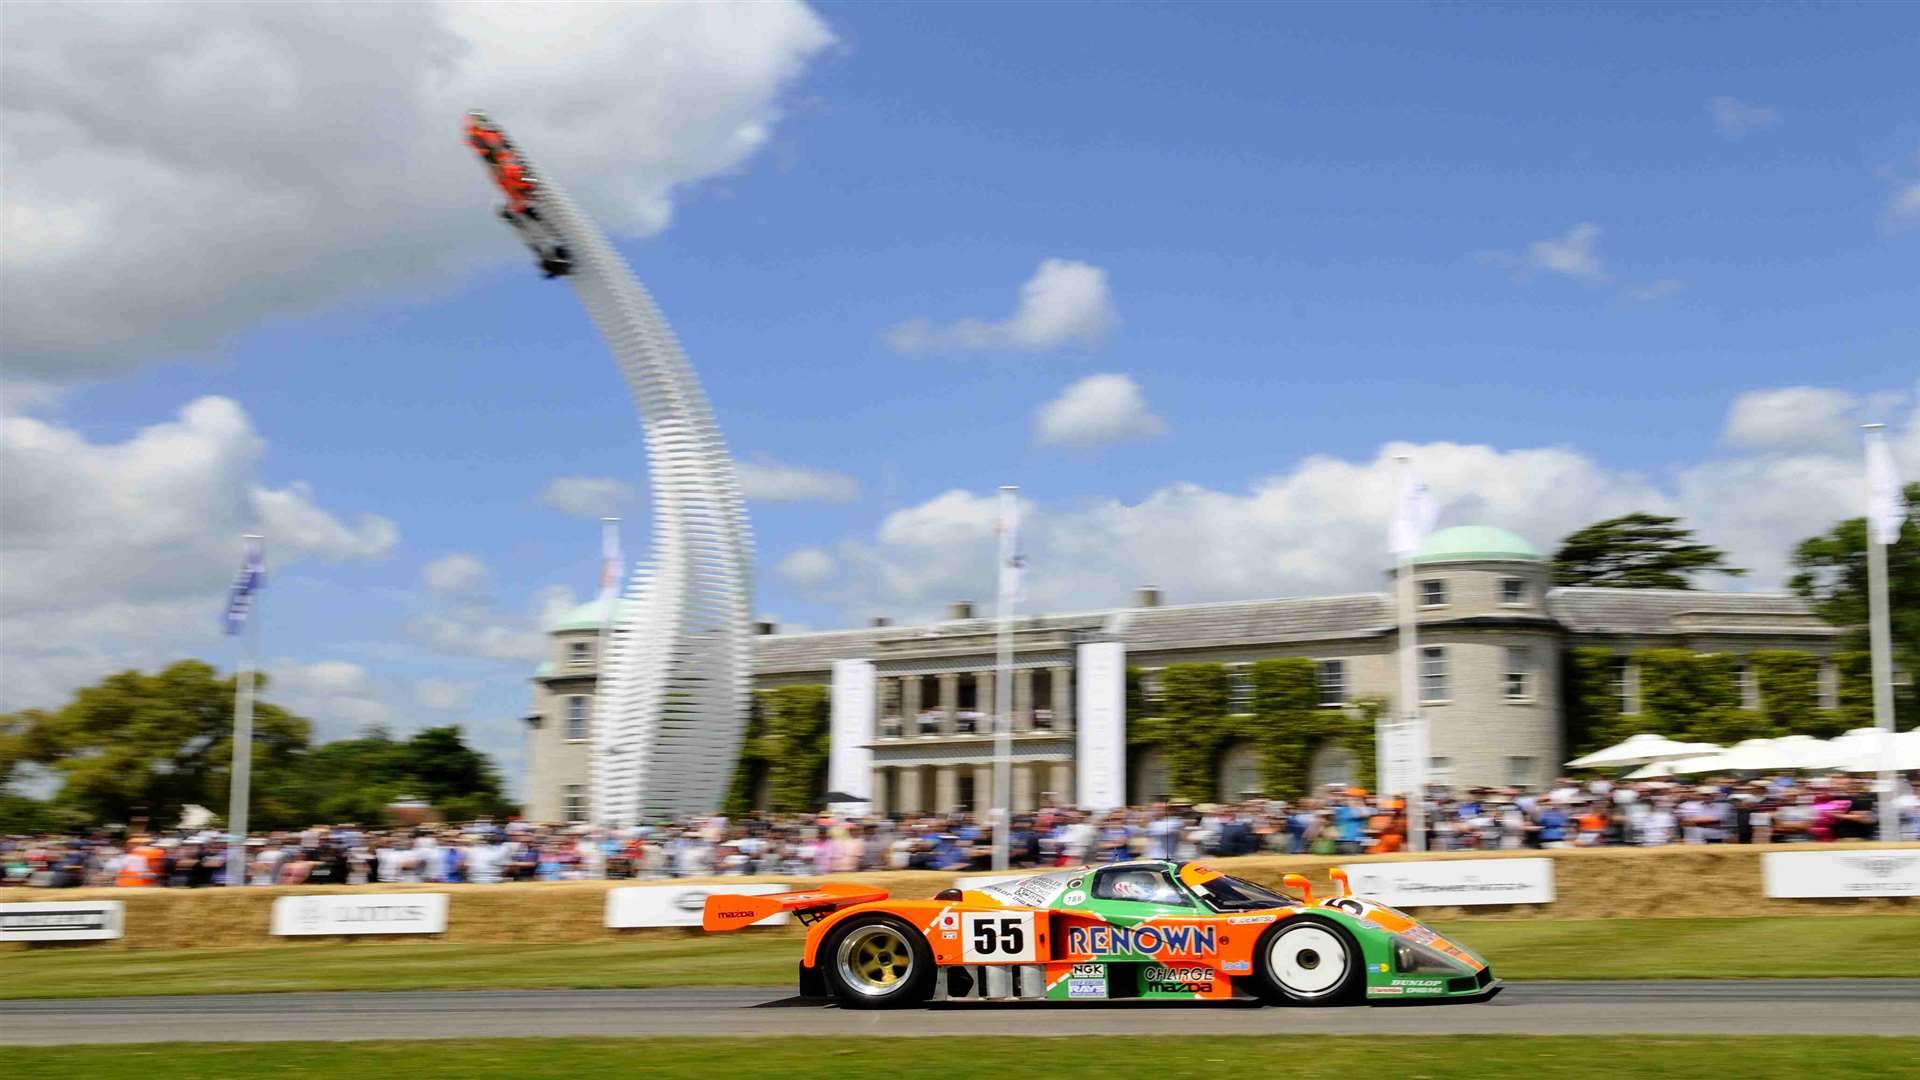 Thousands attend the Festival of Speed event every year. Picture: Simon Hildrew